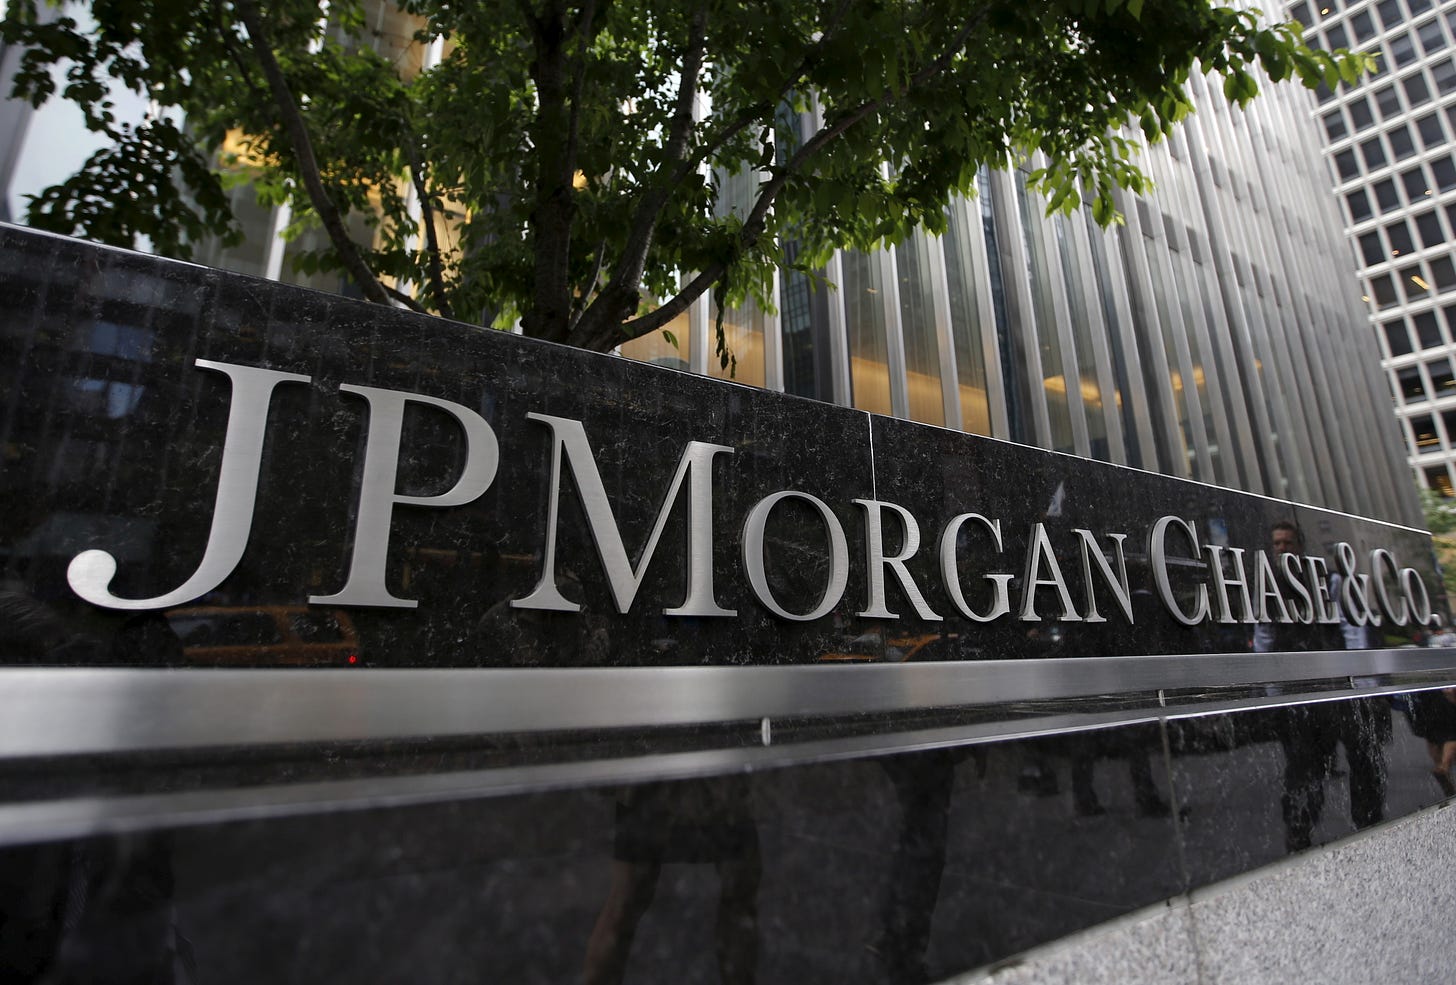 JPMorgan Chase on opening bank branches: 200 down, 200 to go | Reuters